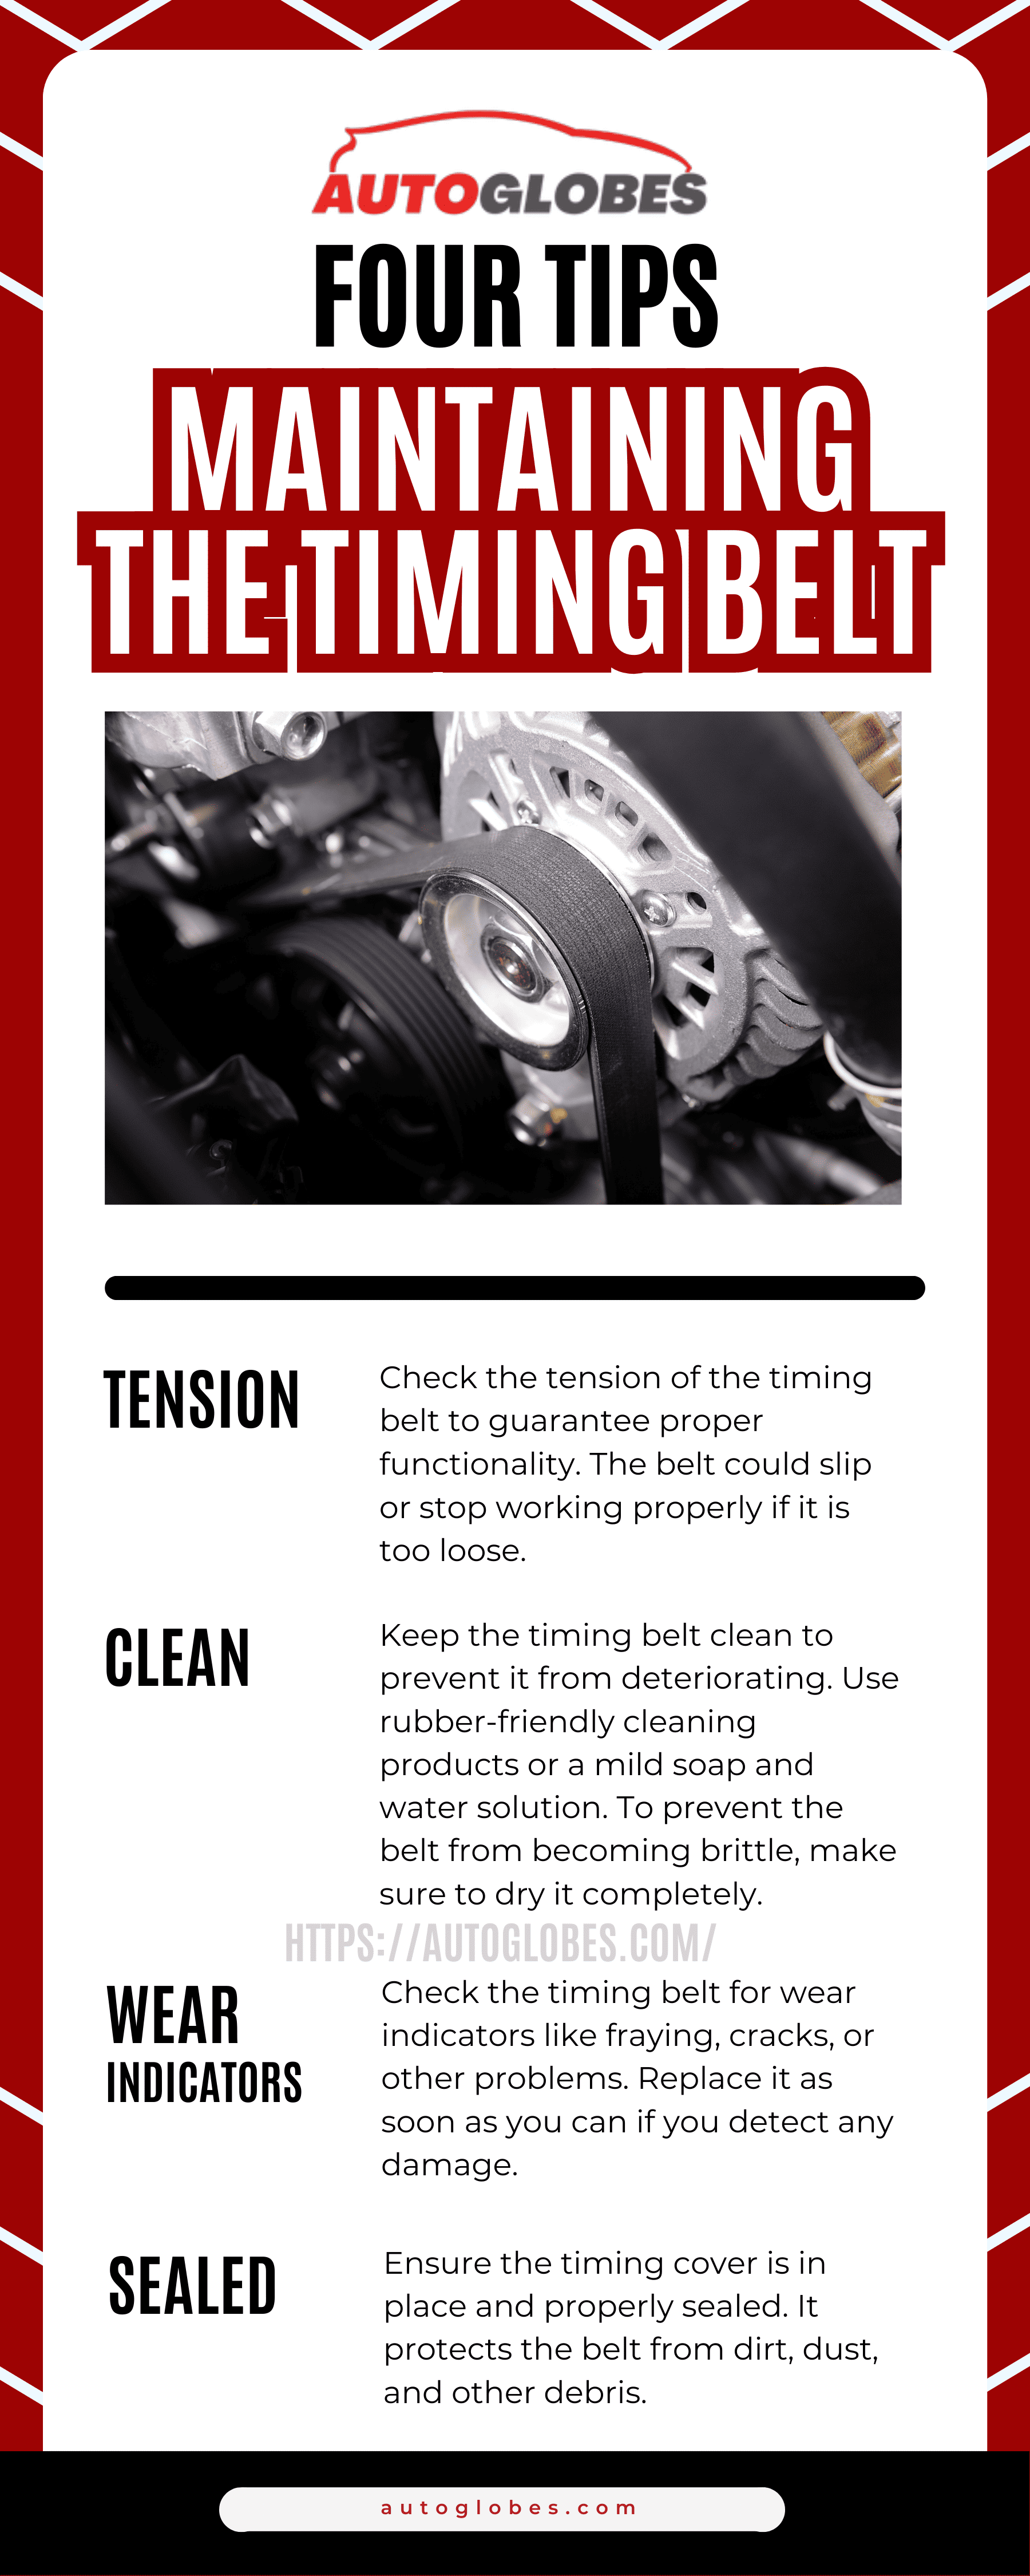 Maintaining the Timing Belt Infographic